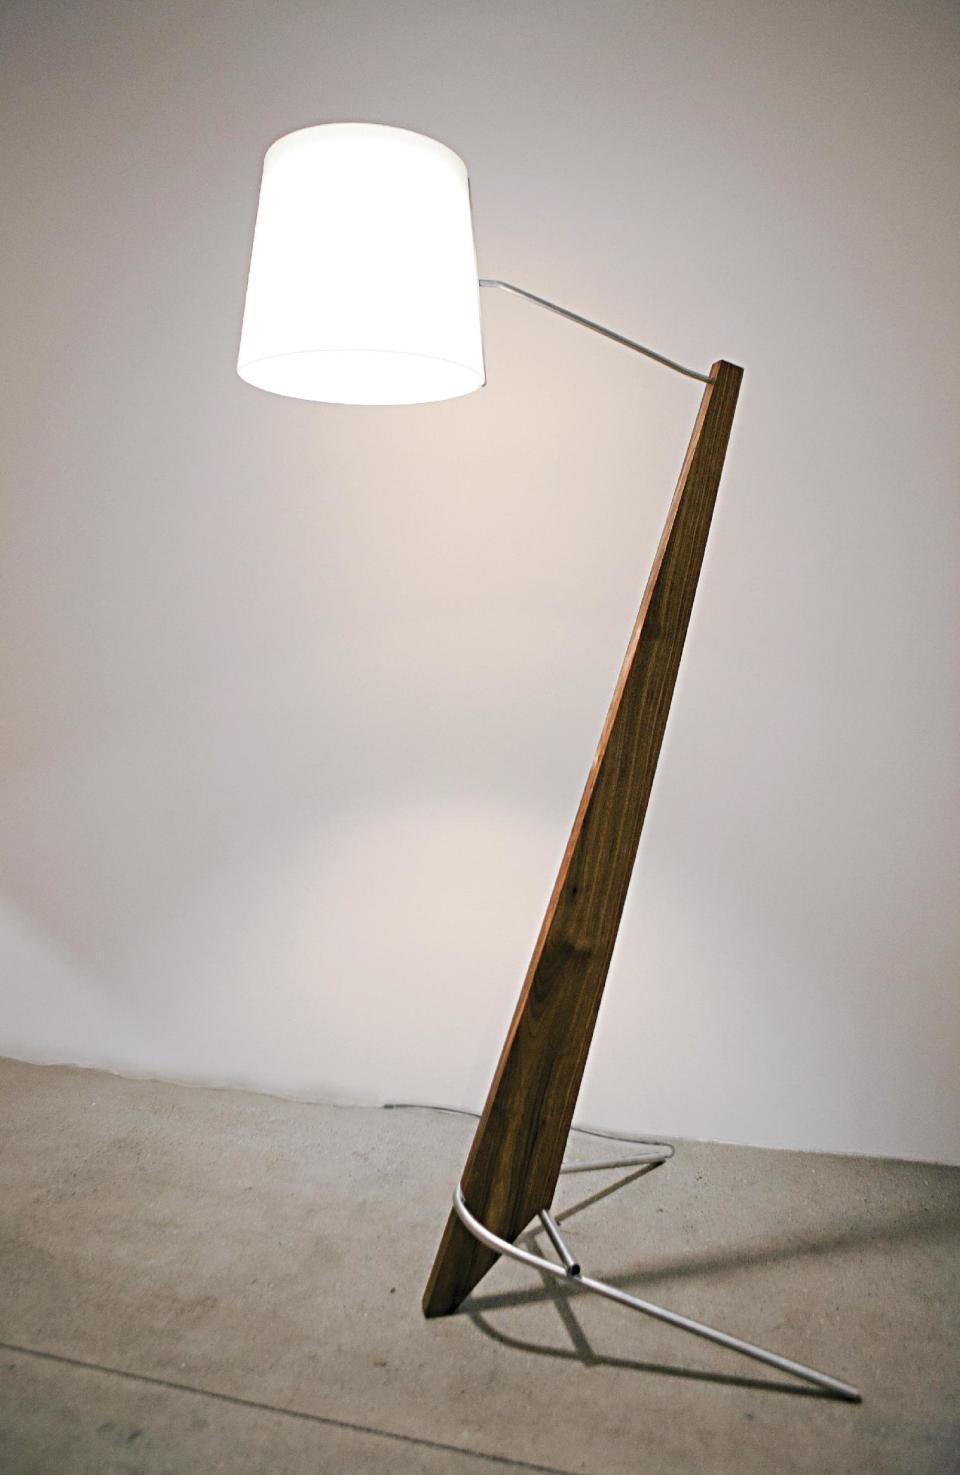 This publicity photo provided by Cerno LLC shows a 84” tall Silva Giant lamp crafted from aluminum and walnut, a dramatic yet sleek fixture that epitomizes contemporary design from Laguna Beach, CA-based Cerno. Silva Giant Designers are experimenting with scale for many of this fall’s furniture and accessories (www.cernogroup.com). (AP Photo/Cerno LLC, David Tosti)